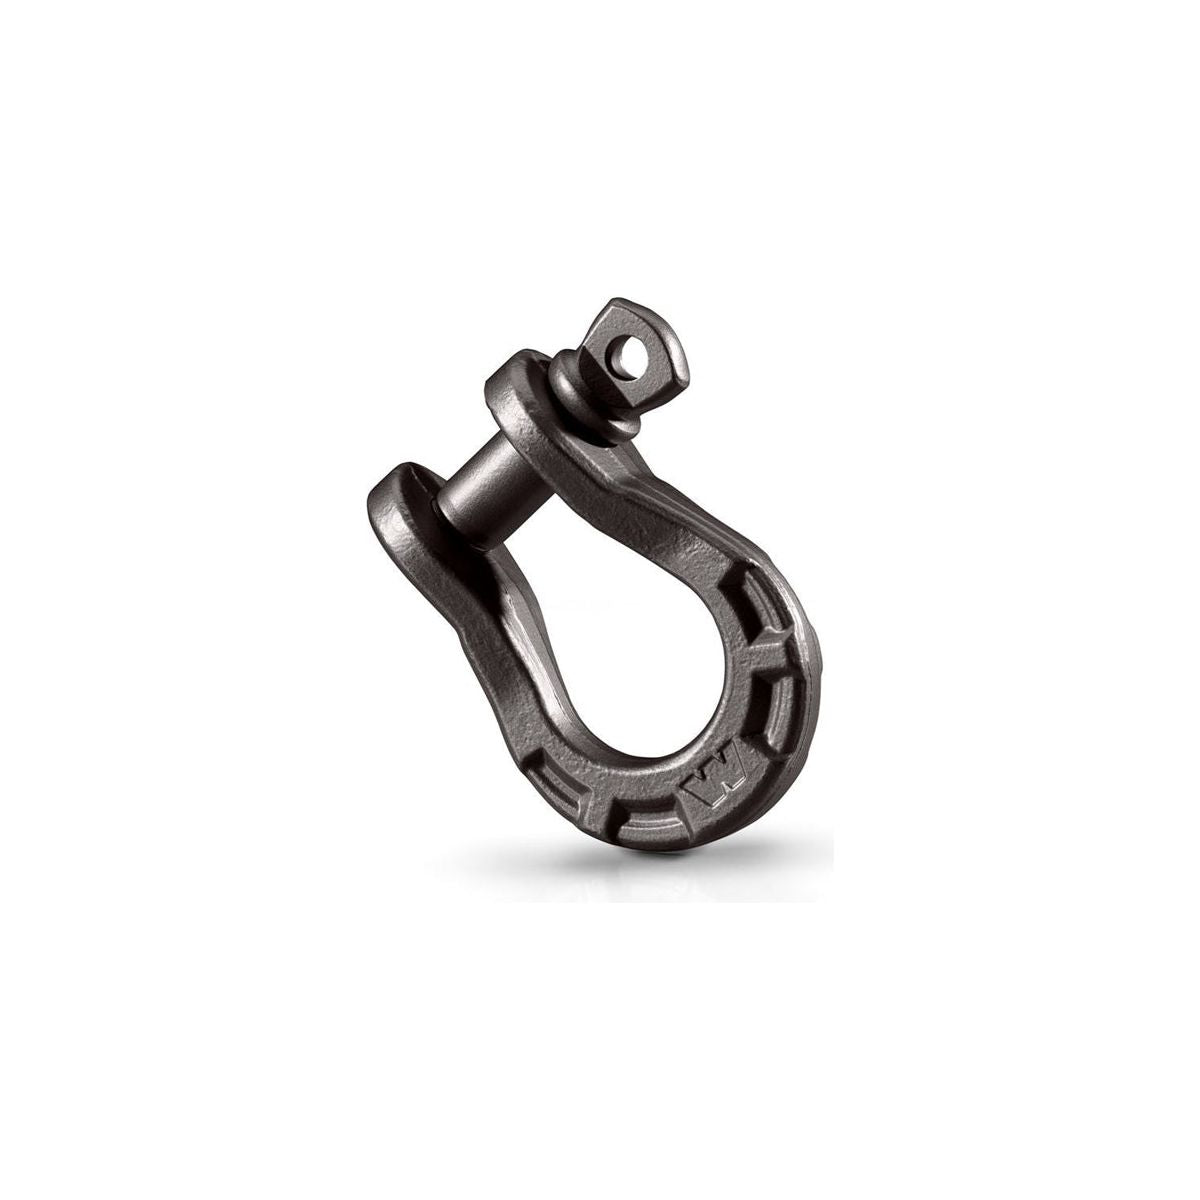 WARN 3-4" Epic D-Ring Shackle - Each 92093